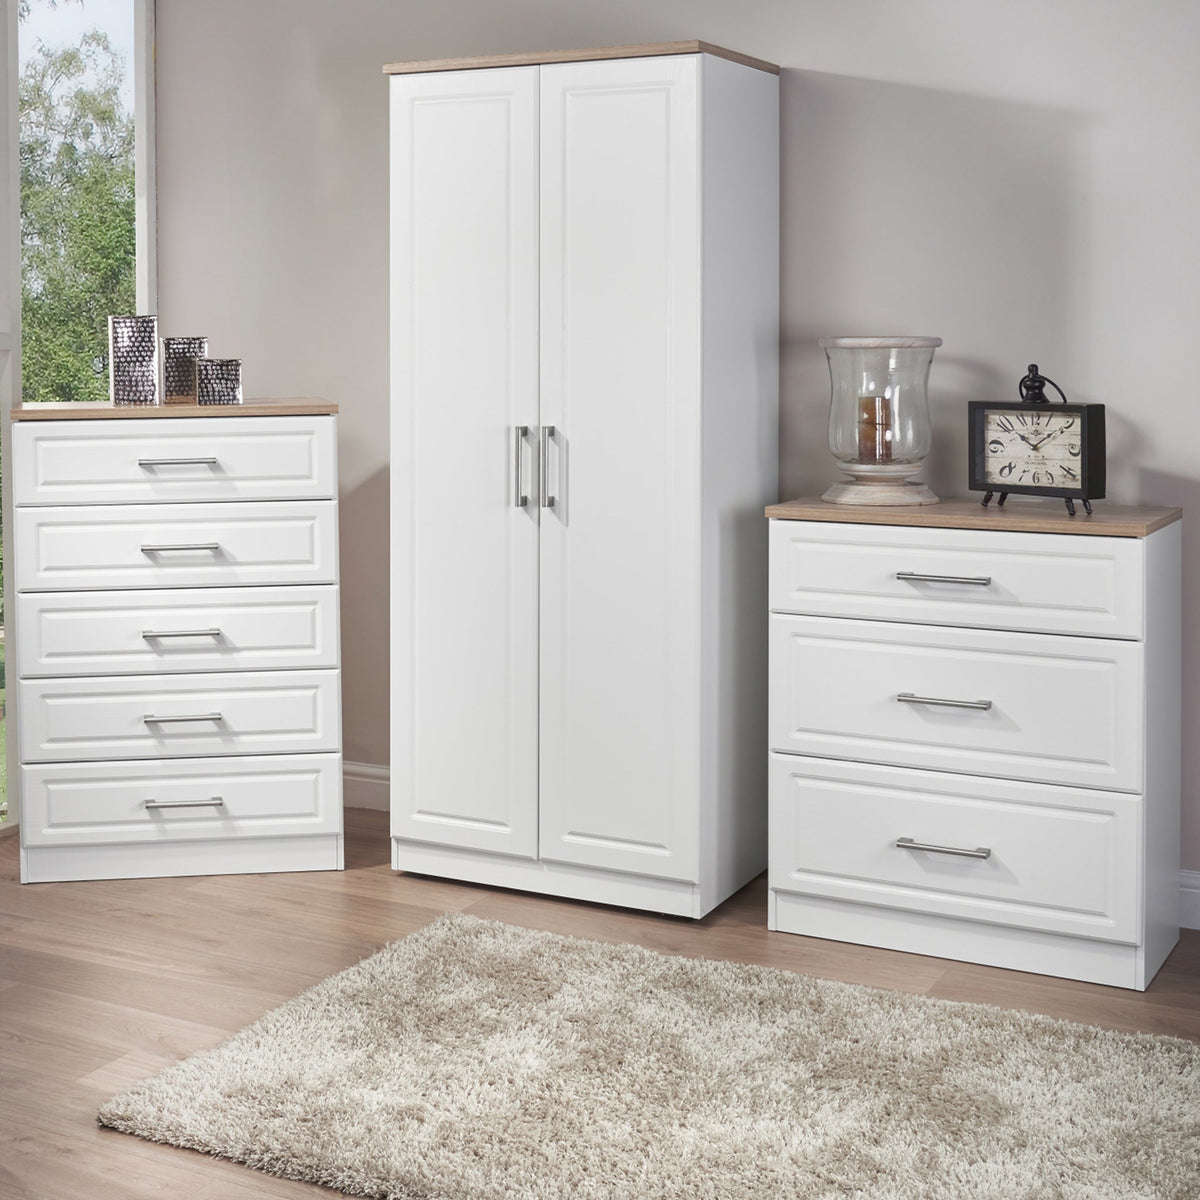 Talland White 3 Piece Bedroom Set from Roseland